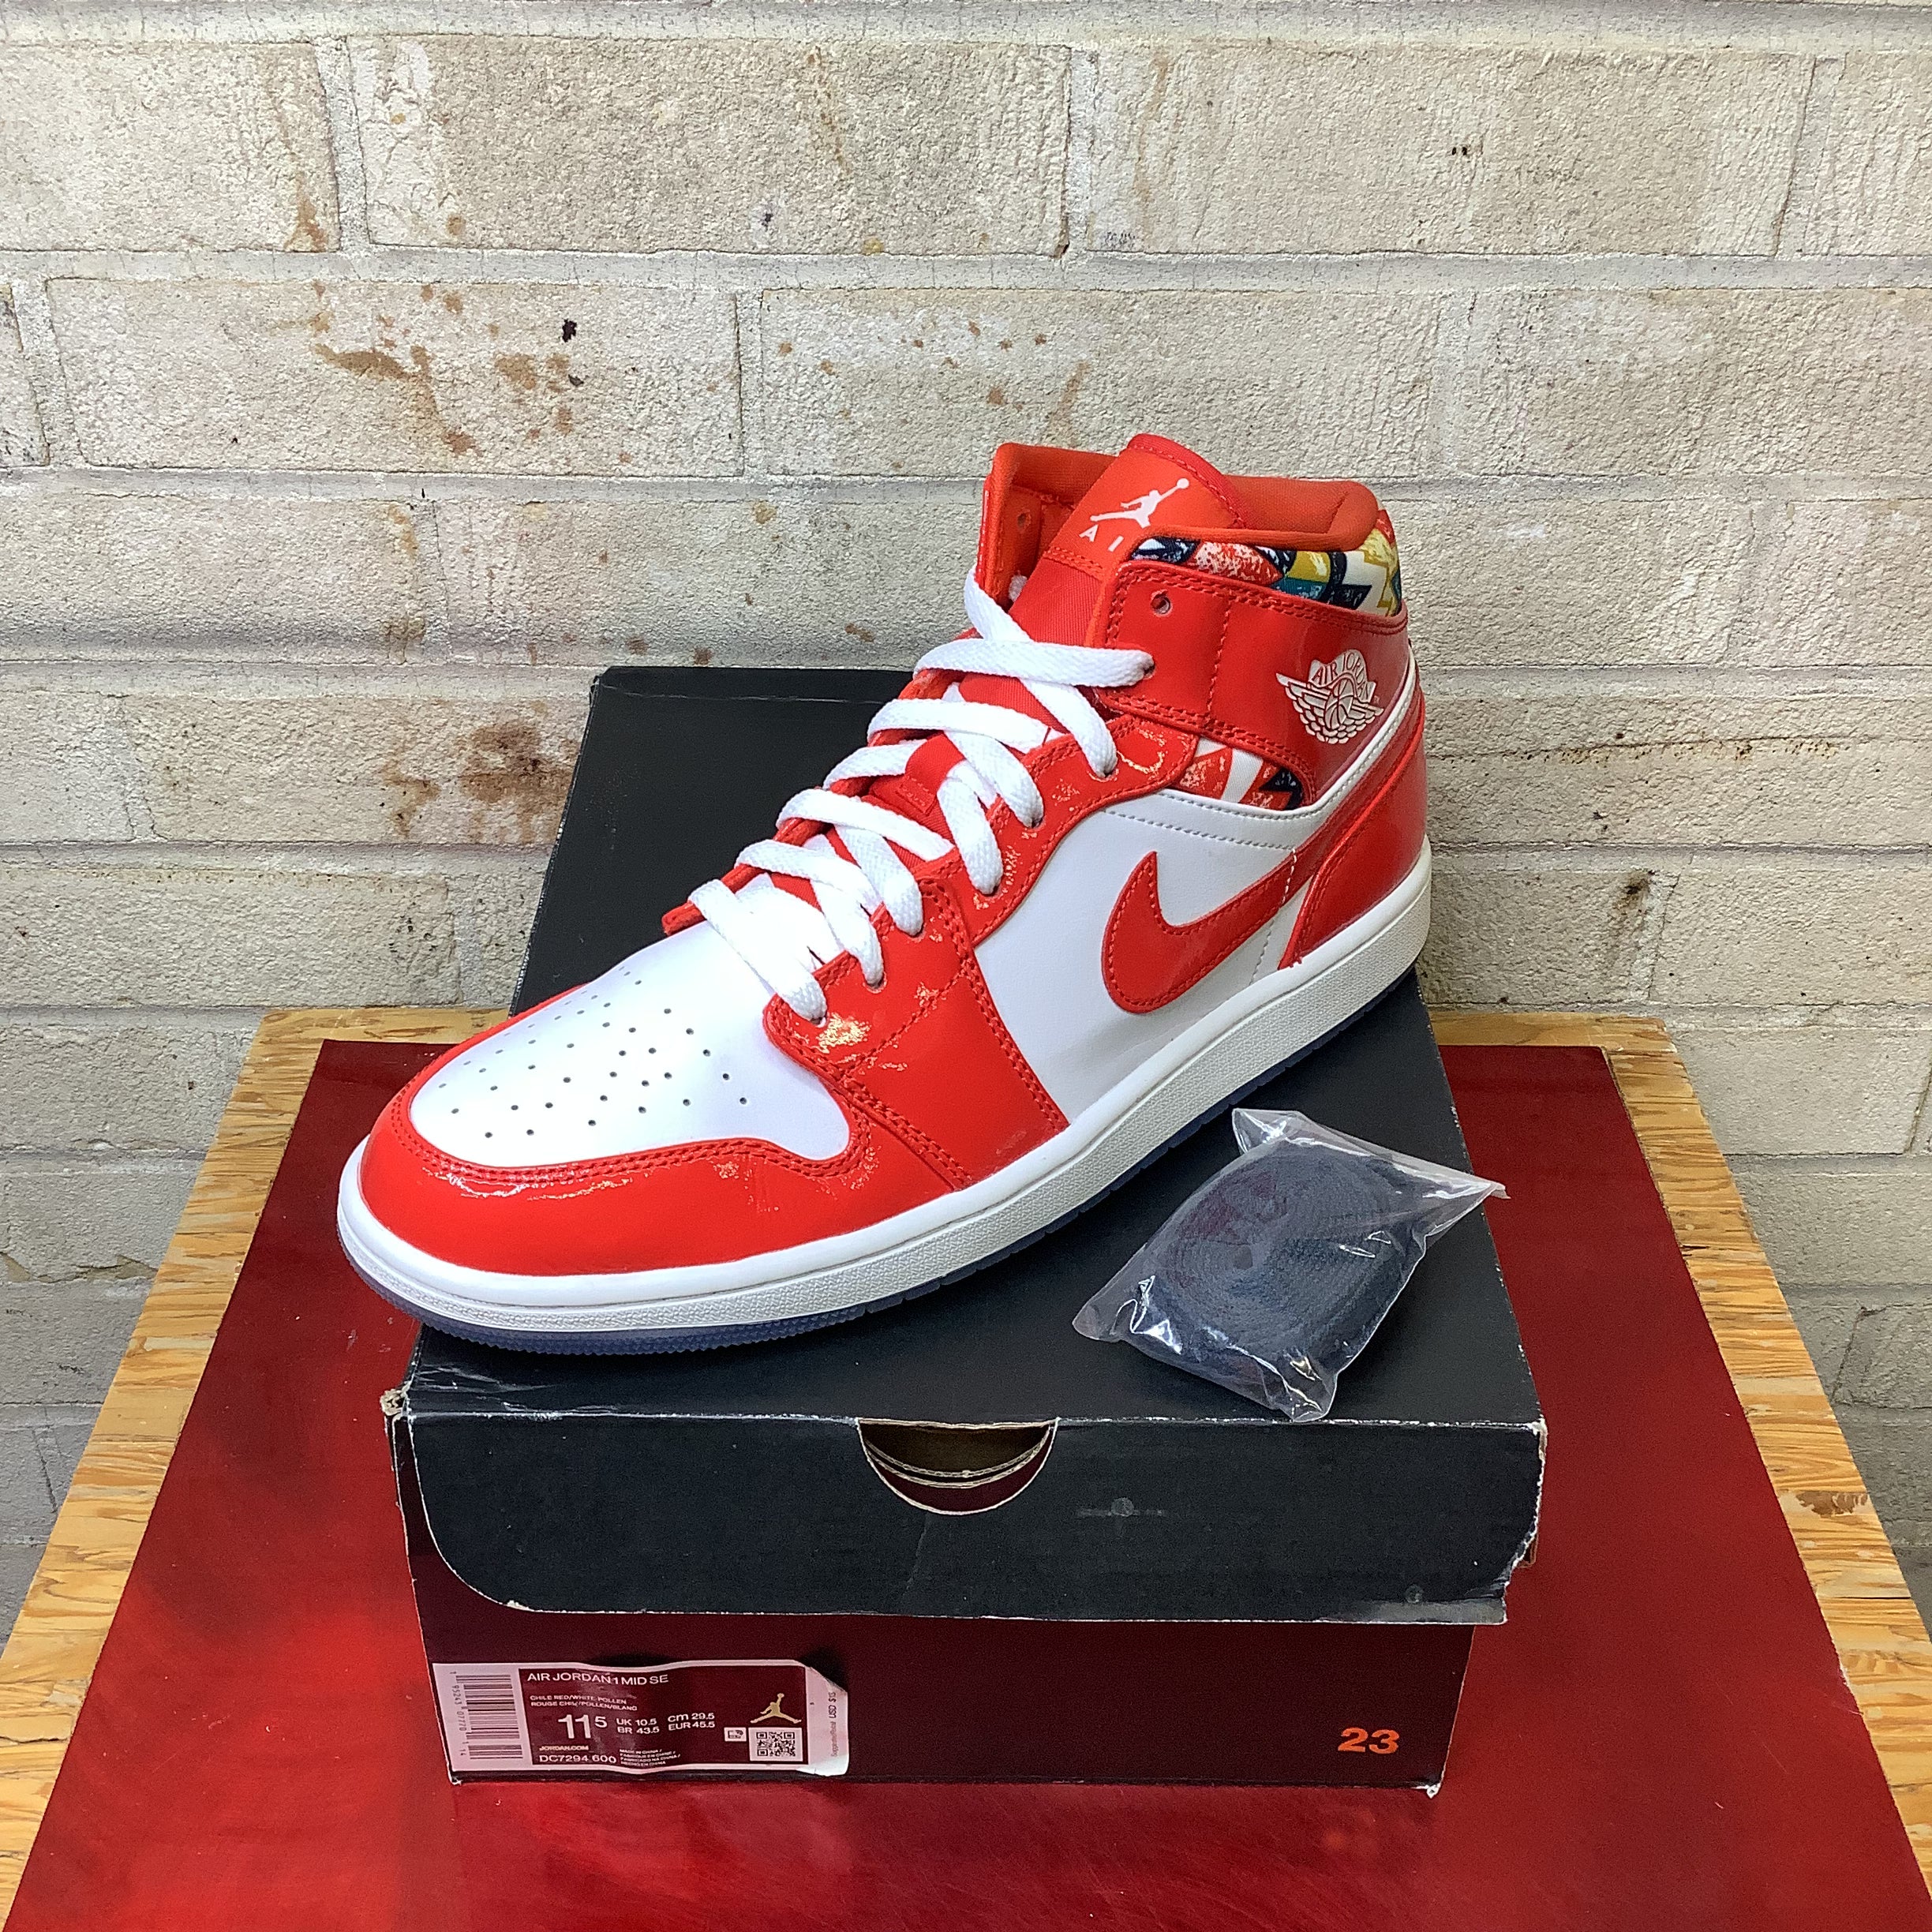 AIR JORDAN 1 MID BARCELONA SWEATER RED SIZE 11.5 DC7294-600